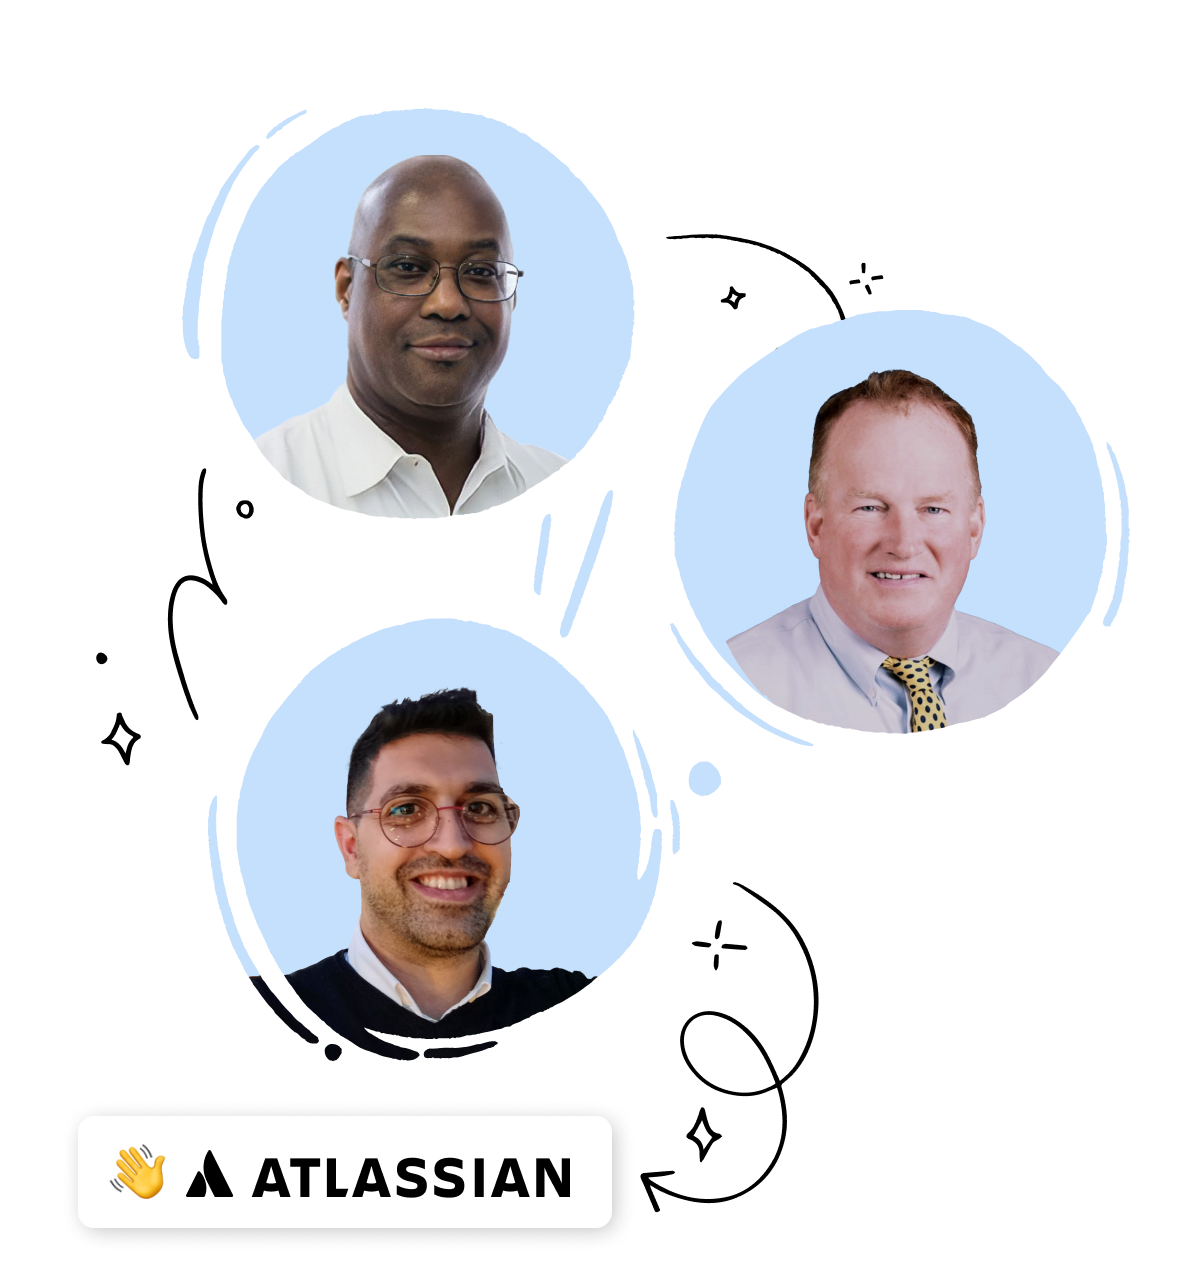 Atlassian powers sales and support at scale with Intercom